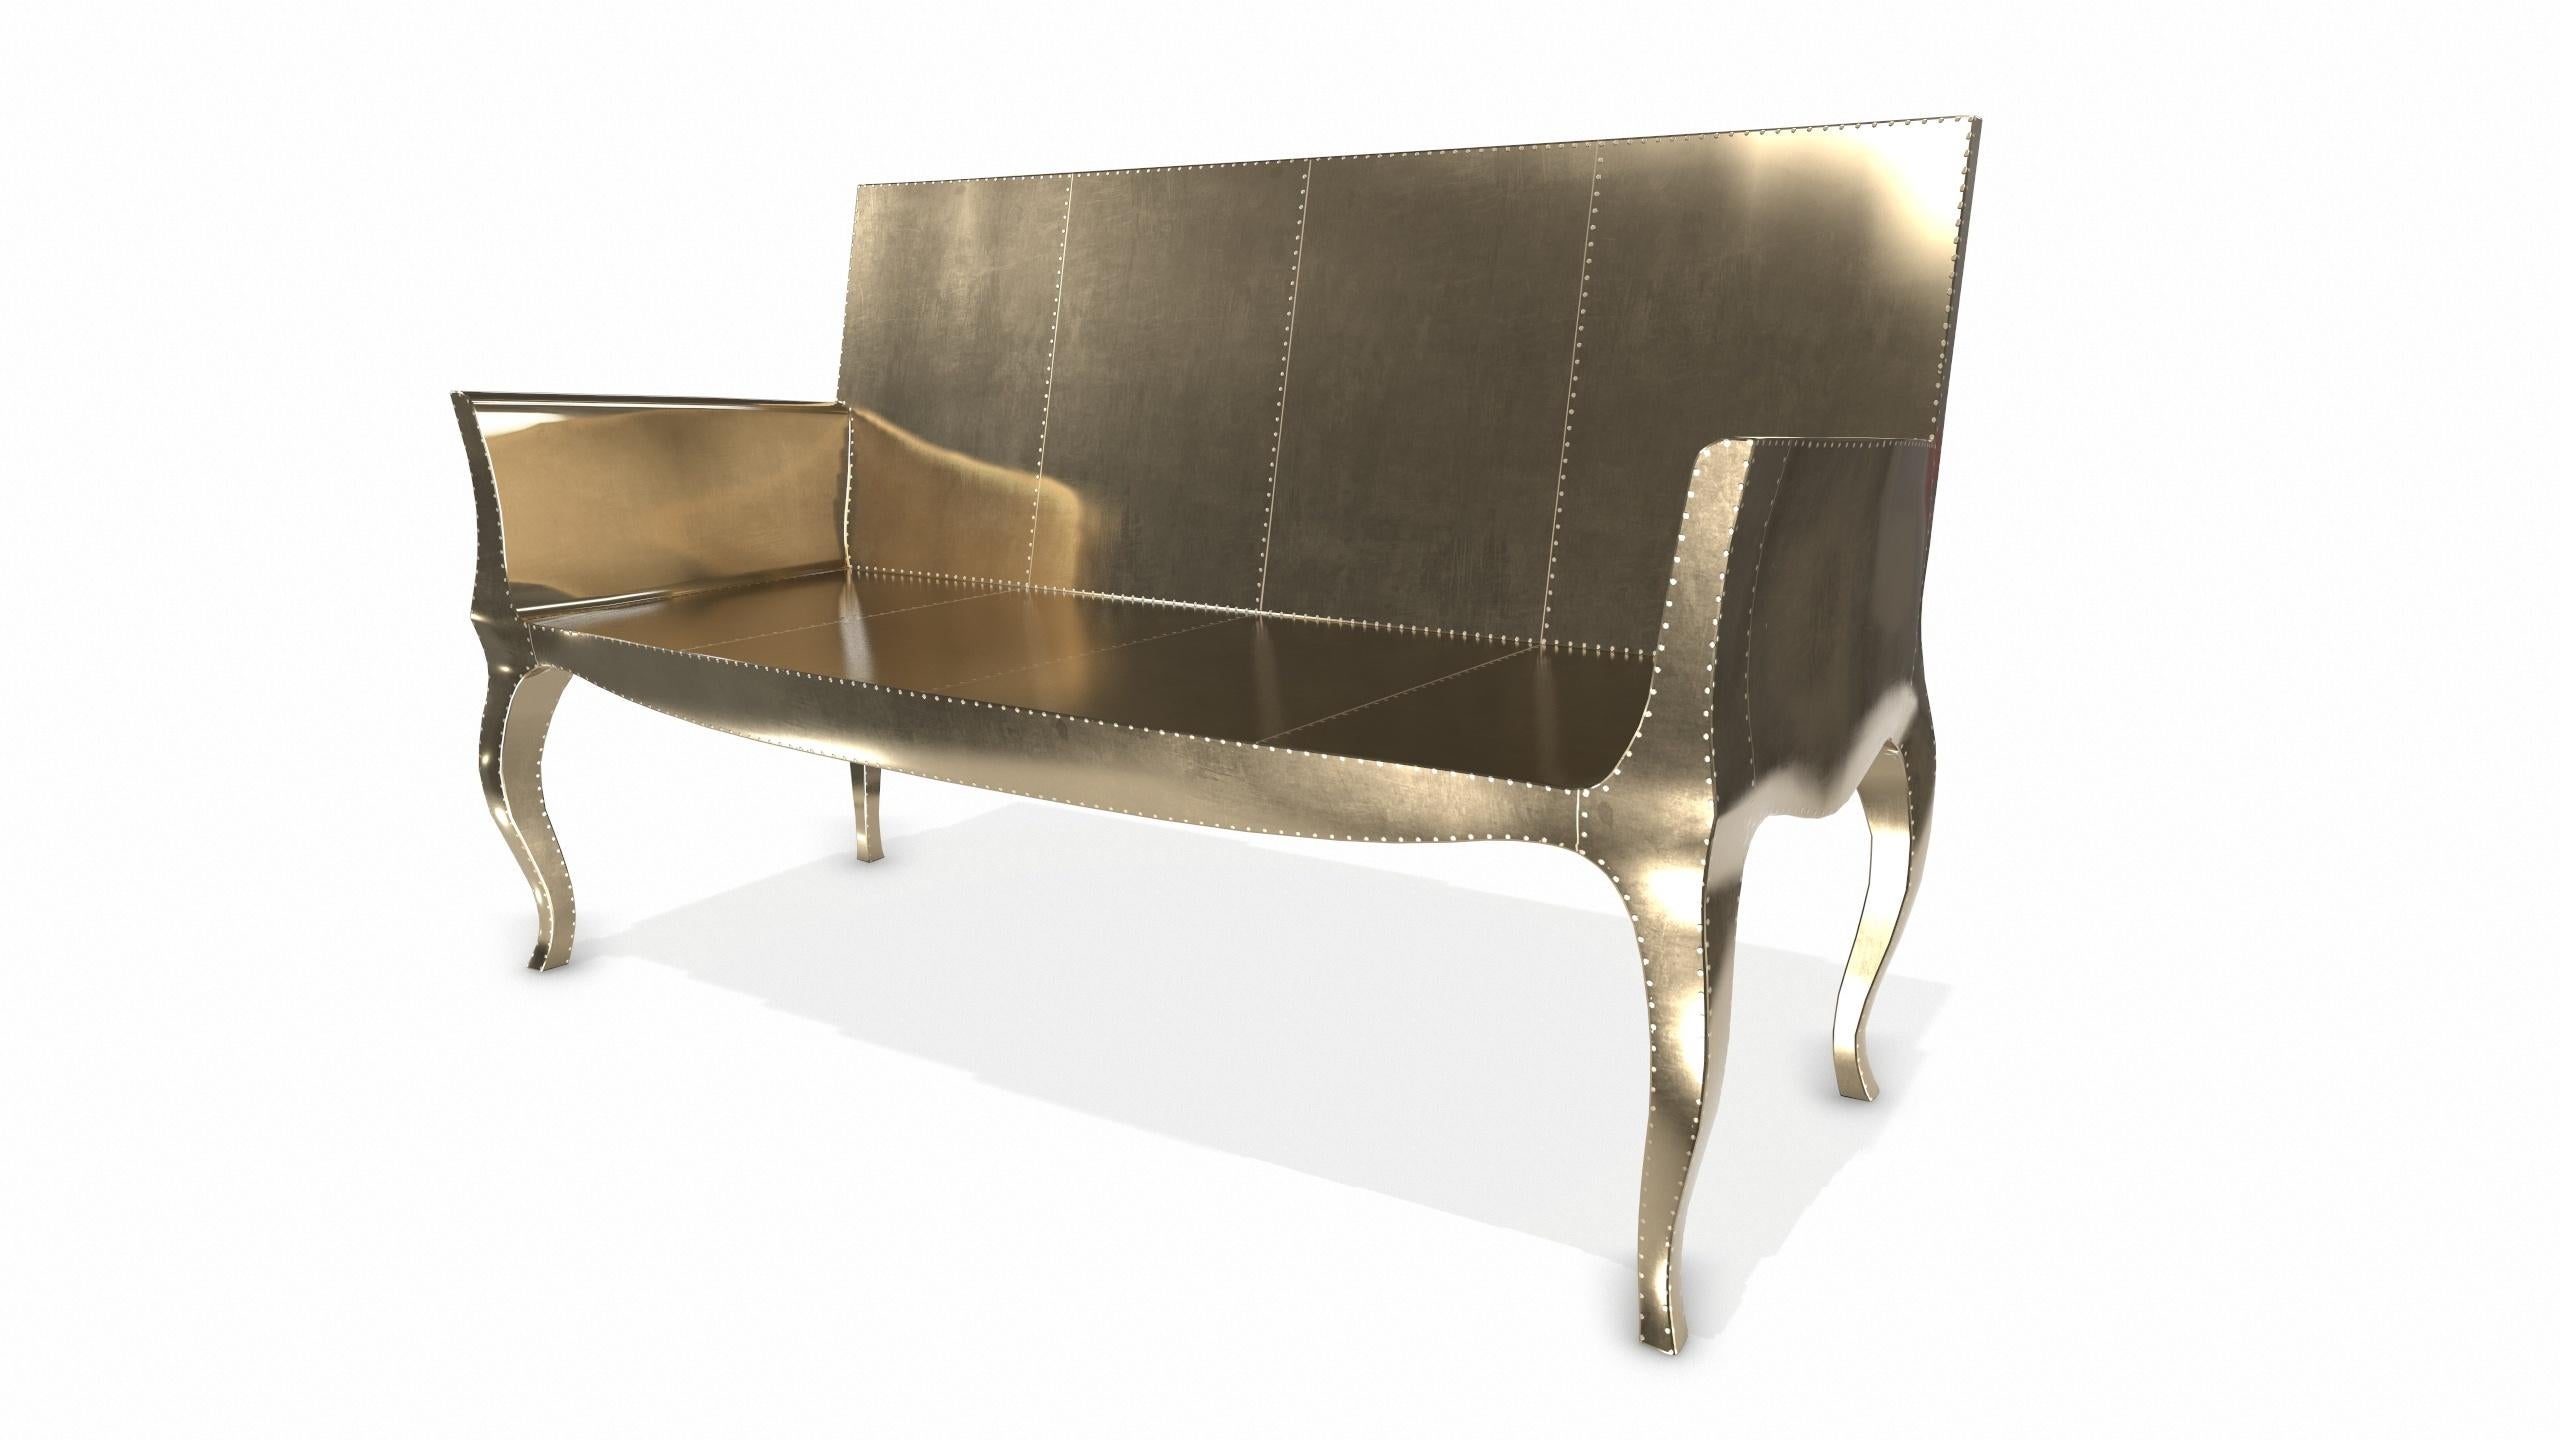 American Louise Settee Art Deco Chaise Longues in Smooth Brass by Paul Mathieu For Sale